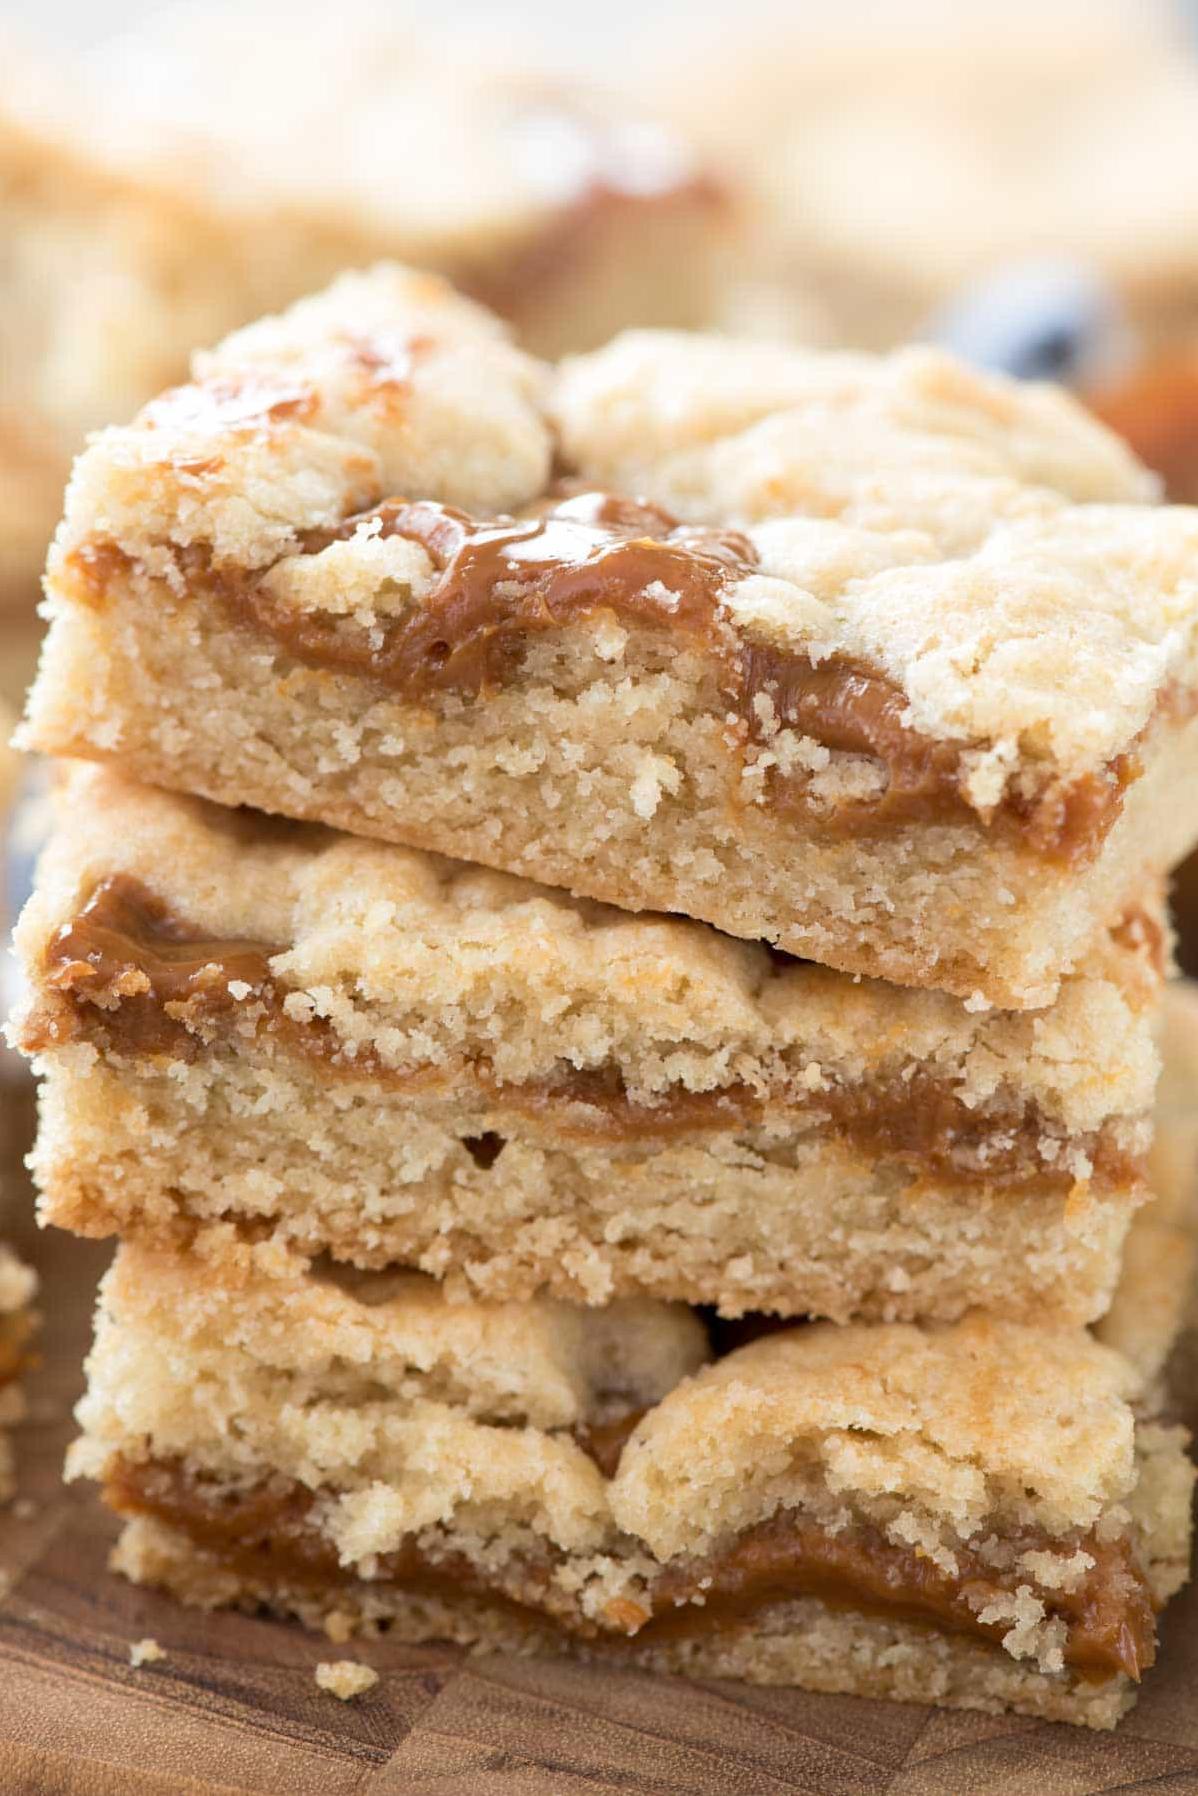  These bars are perfect for satisfying your sweet tooth cravings.